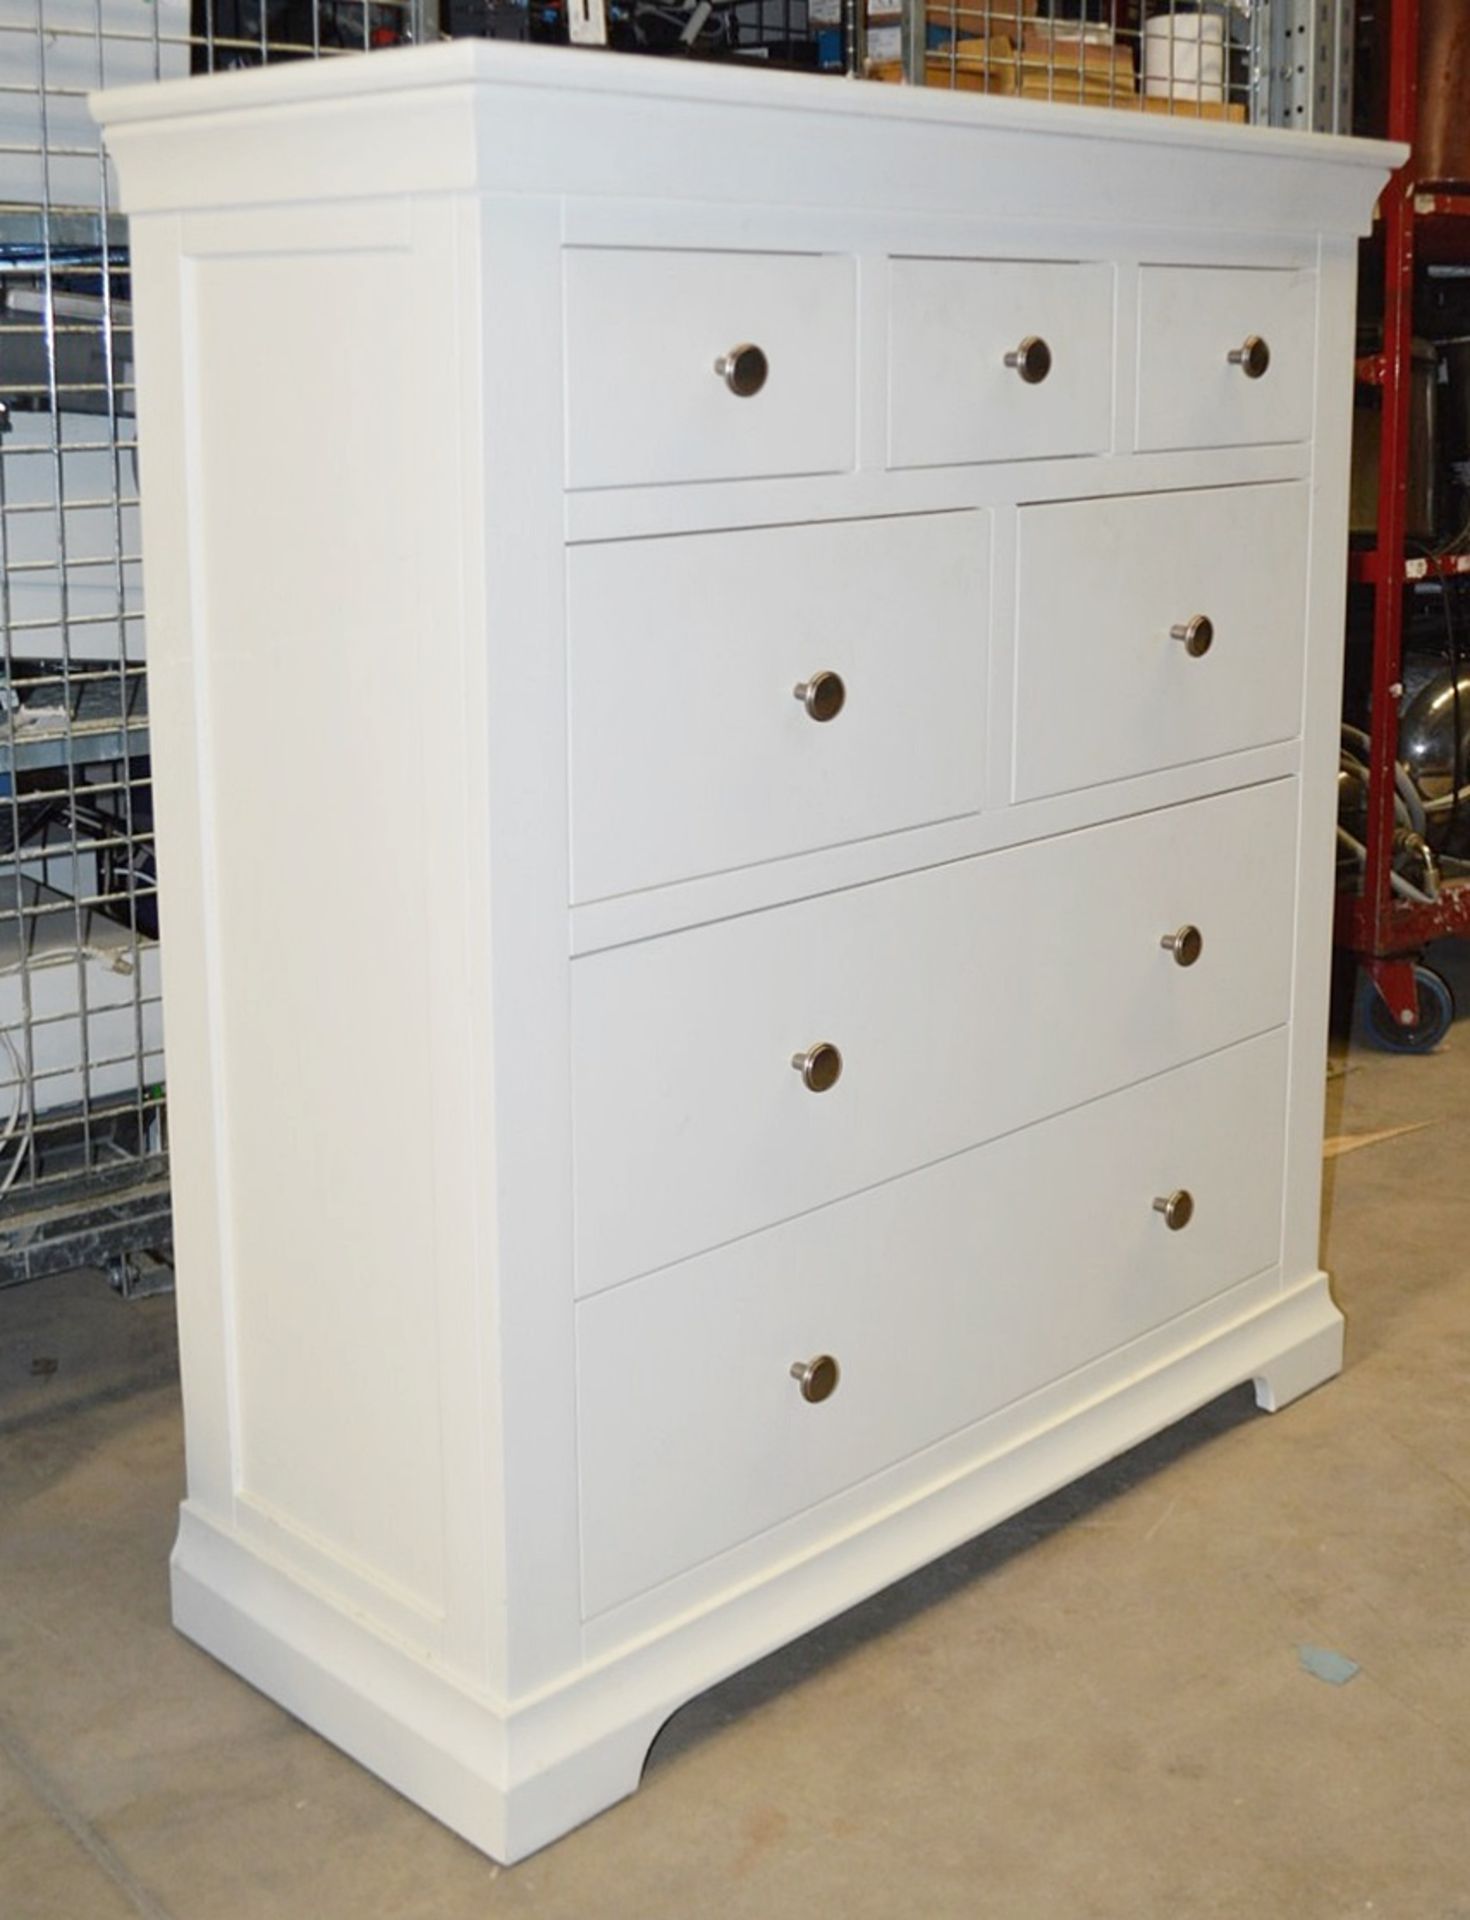 1 x Tall Drawer Unit In Cream - From An Exclusive Property In Hale Barns - Dimensions: 105 x 42 x - Image 2 of 6